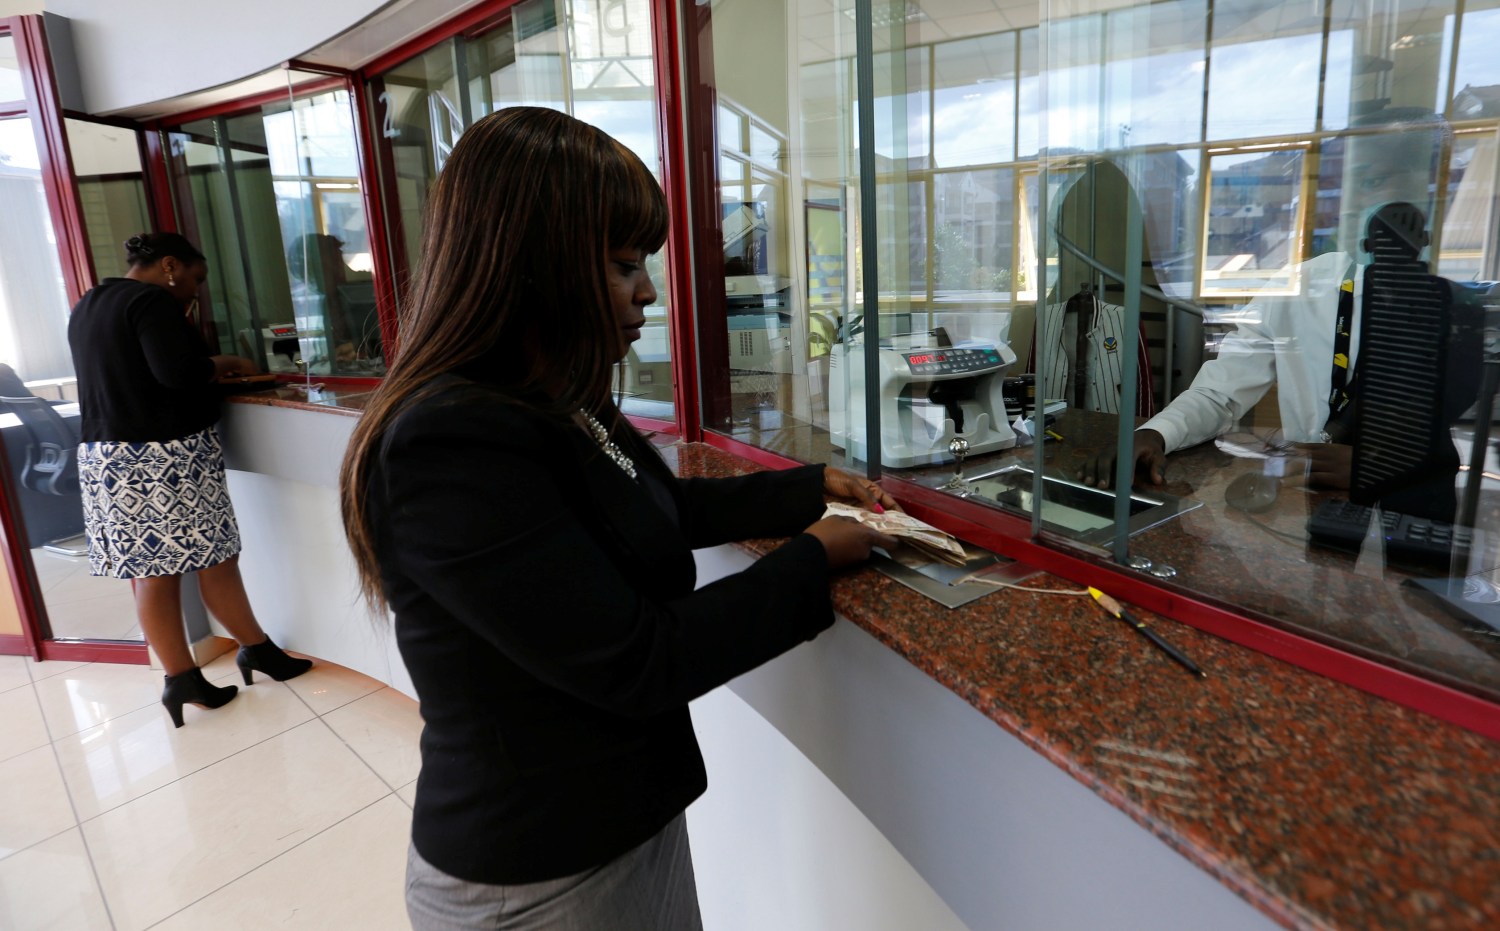 A customer is served at the teller counter inside the banking hall at Kenya's Sidian Bank headquarters on the outskirts of Kenya's capital Nairobi, June 29, 2016.  Picture taken June 29, 2016. REUTERS/Thomas Mukoya  - S1AETMWQMVAB